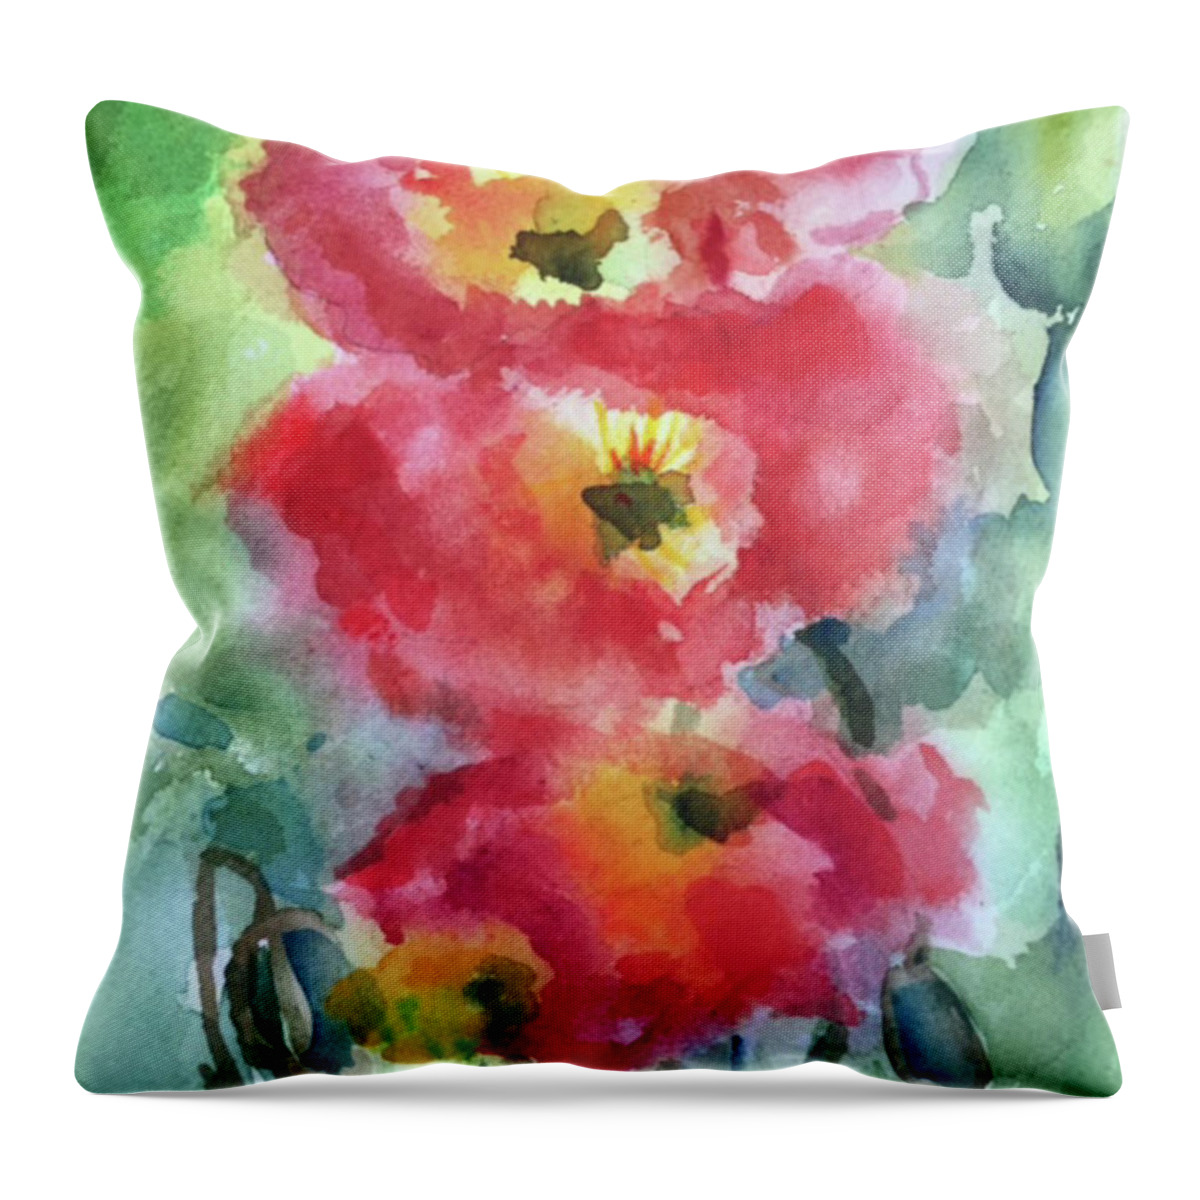 Floral Throw Pillow featuring the painting Trio by Bonny Butler